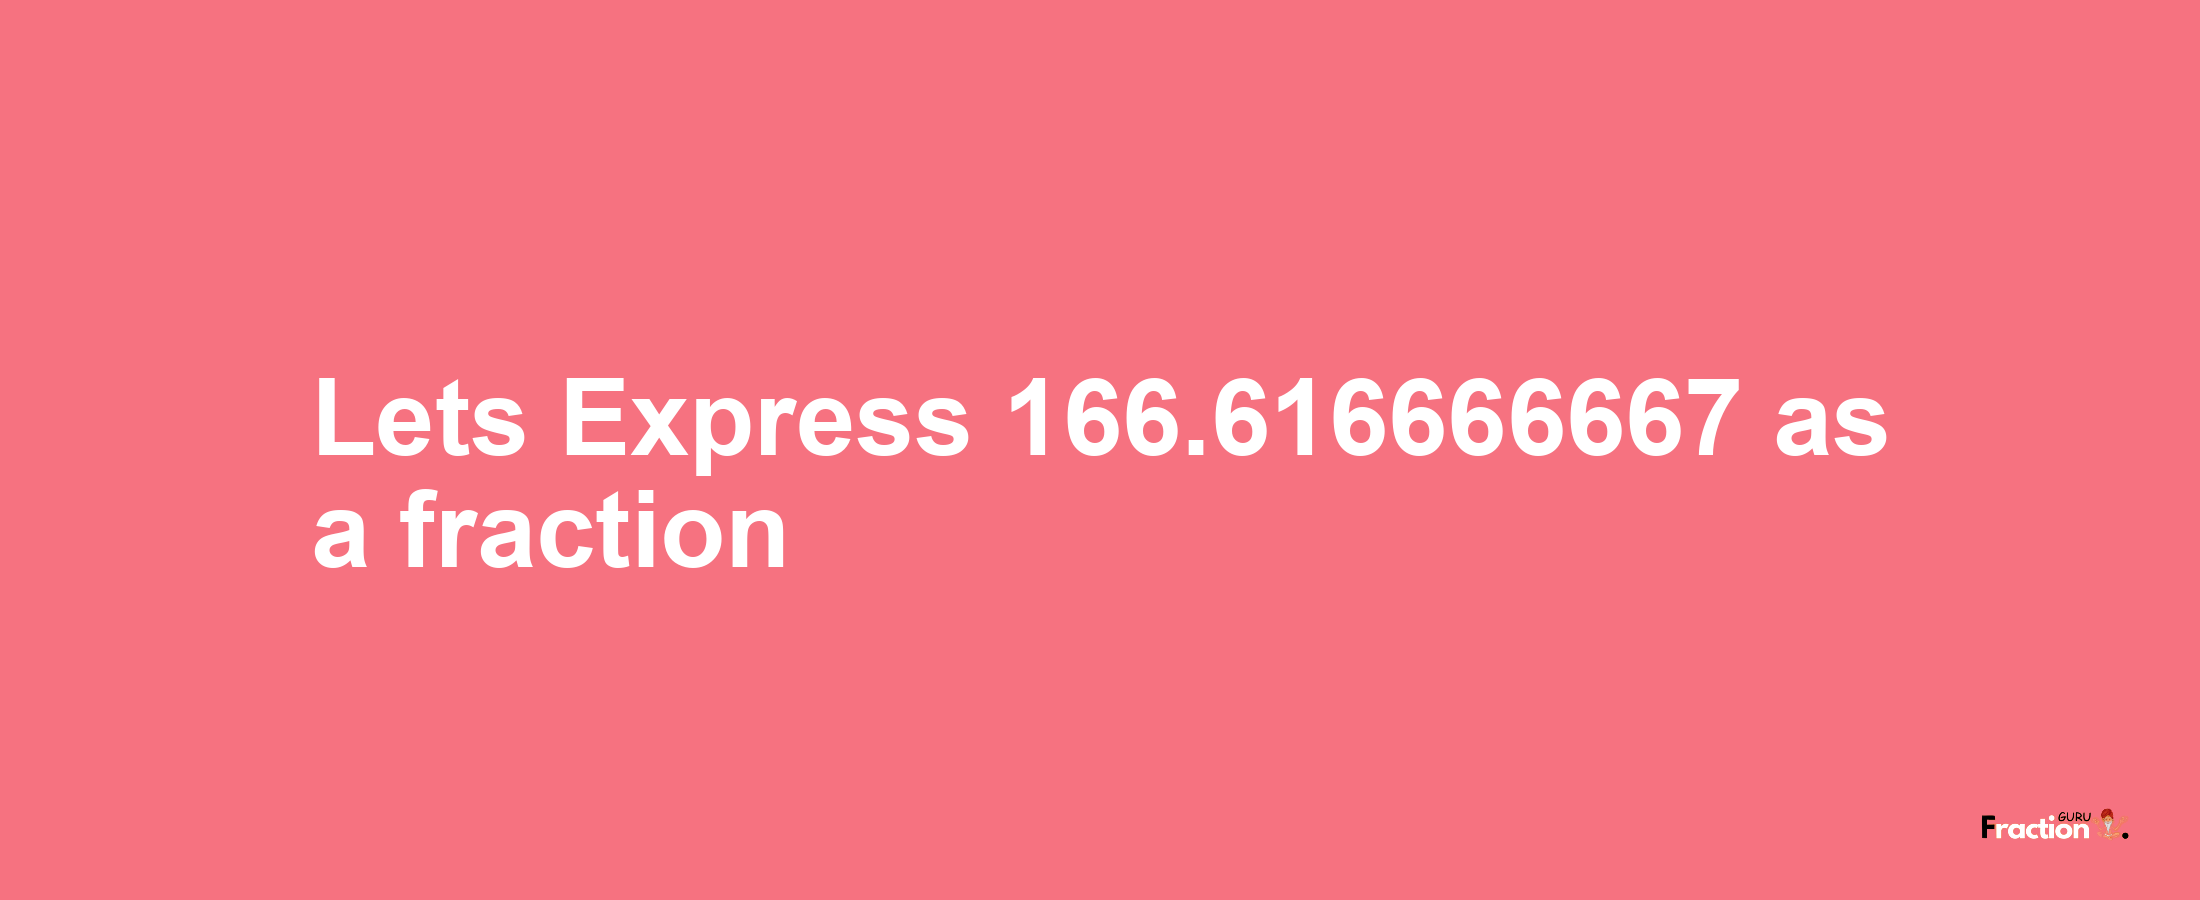 Lets Express 166.616666667 as afraction